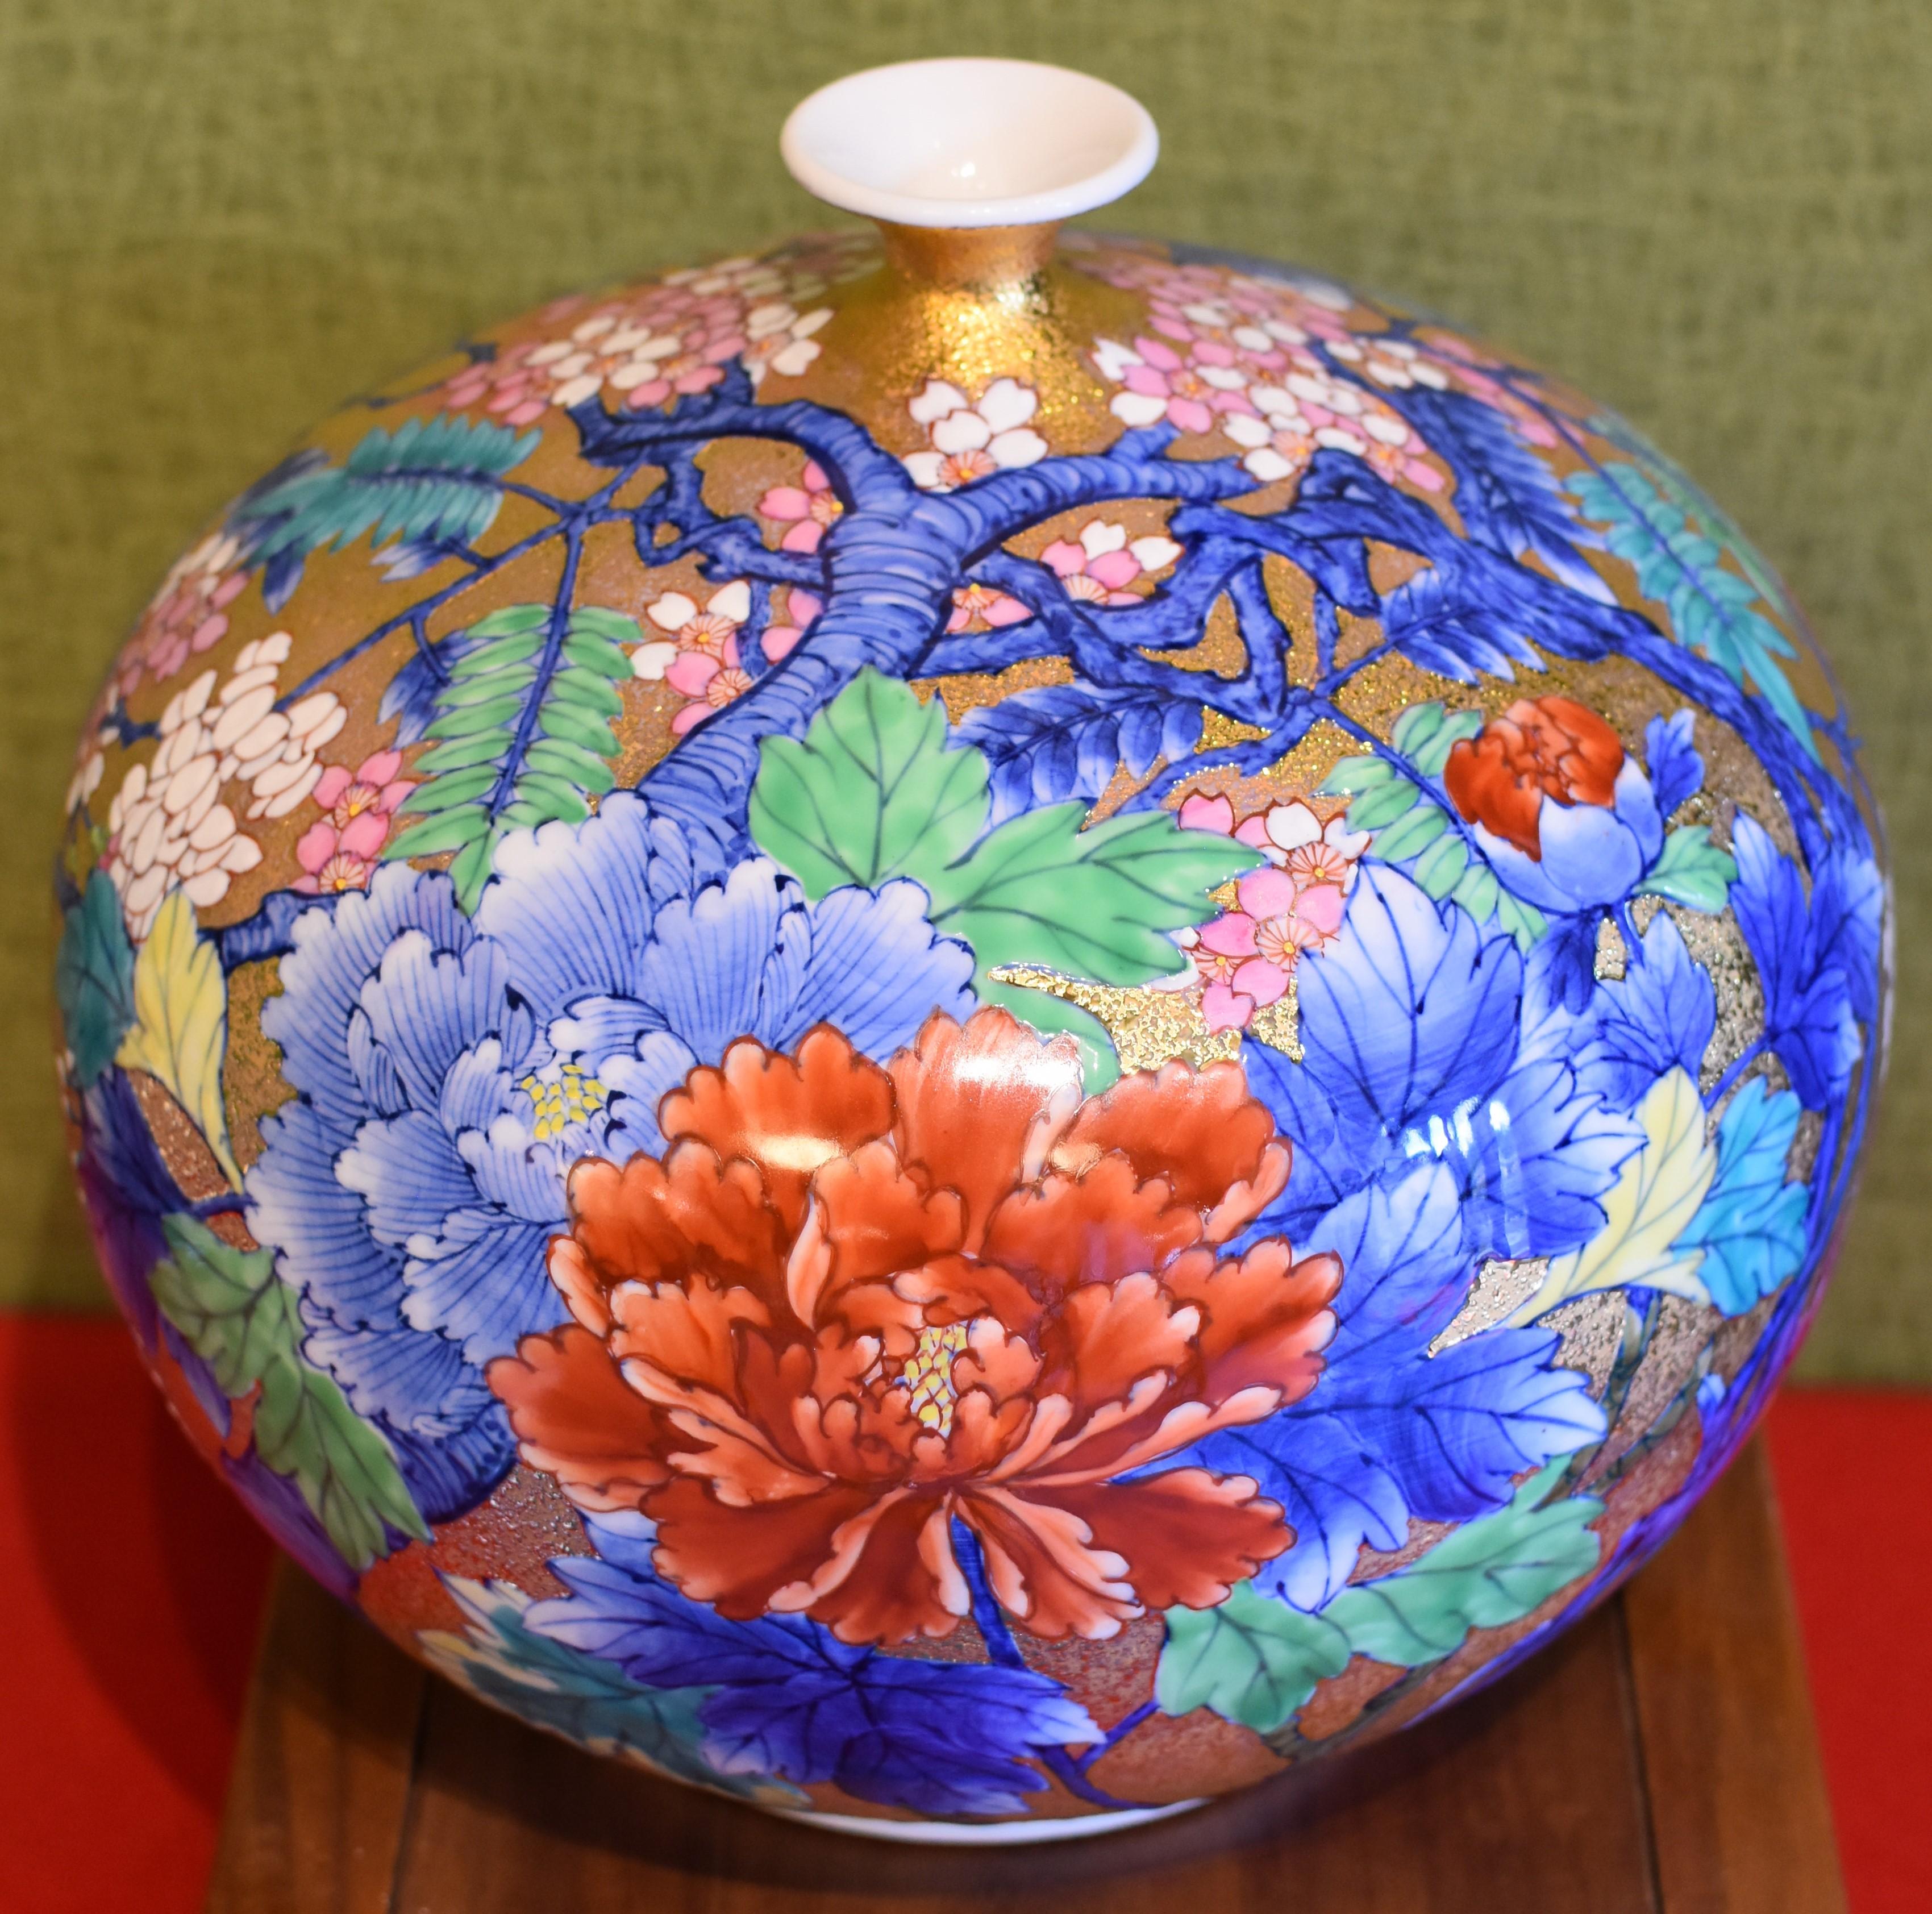 Mesmerizing contemporary Japanese porcelain vase, hand-painted in vivid blue, green, red, pink and white on an attractively shaped ovoid body in gold, a signed masterpiece by acclaimed and award-winning master porcelain artist from the Imari-Arita